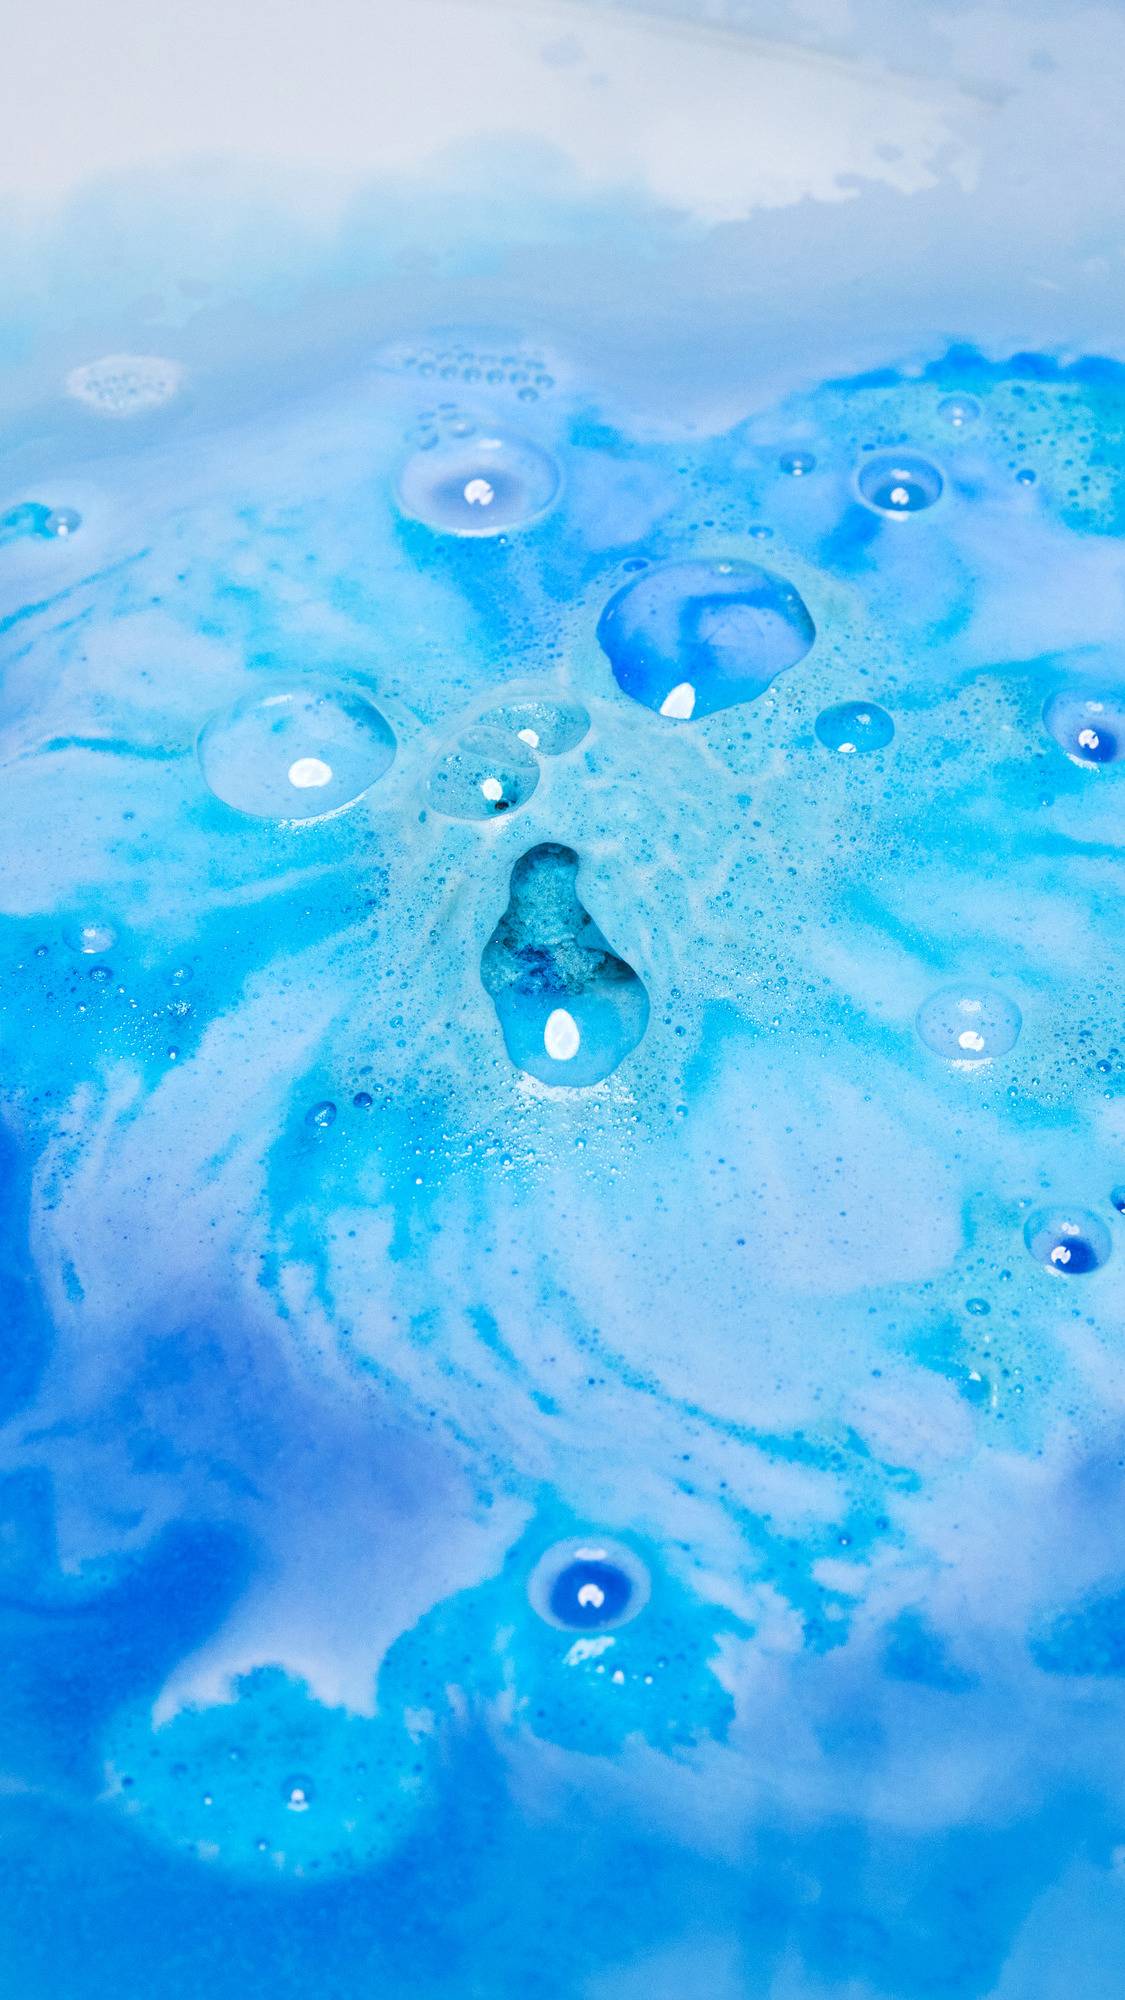 The Hexagon bath bomb is dissolving in the bath water leaving behind ocean-like swirls of deep blues and indigo with lightly foamy bubbles. 